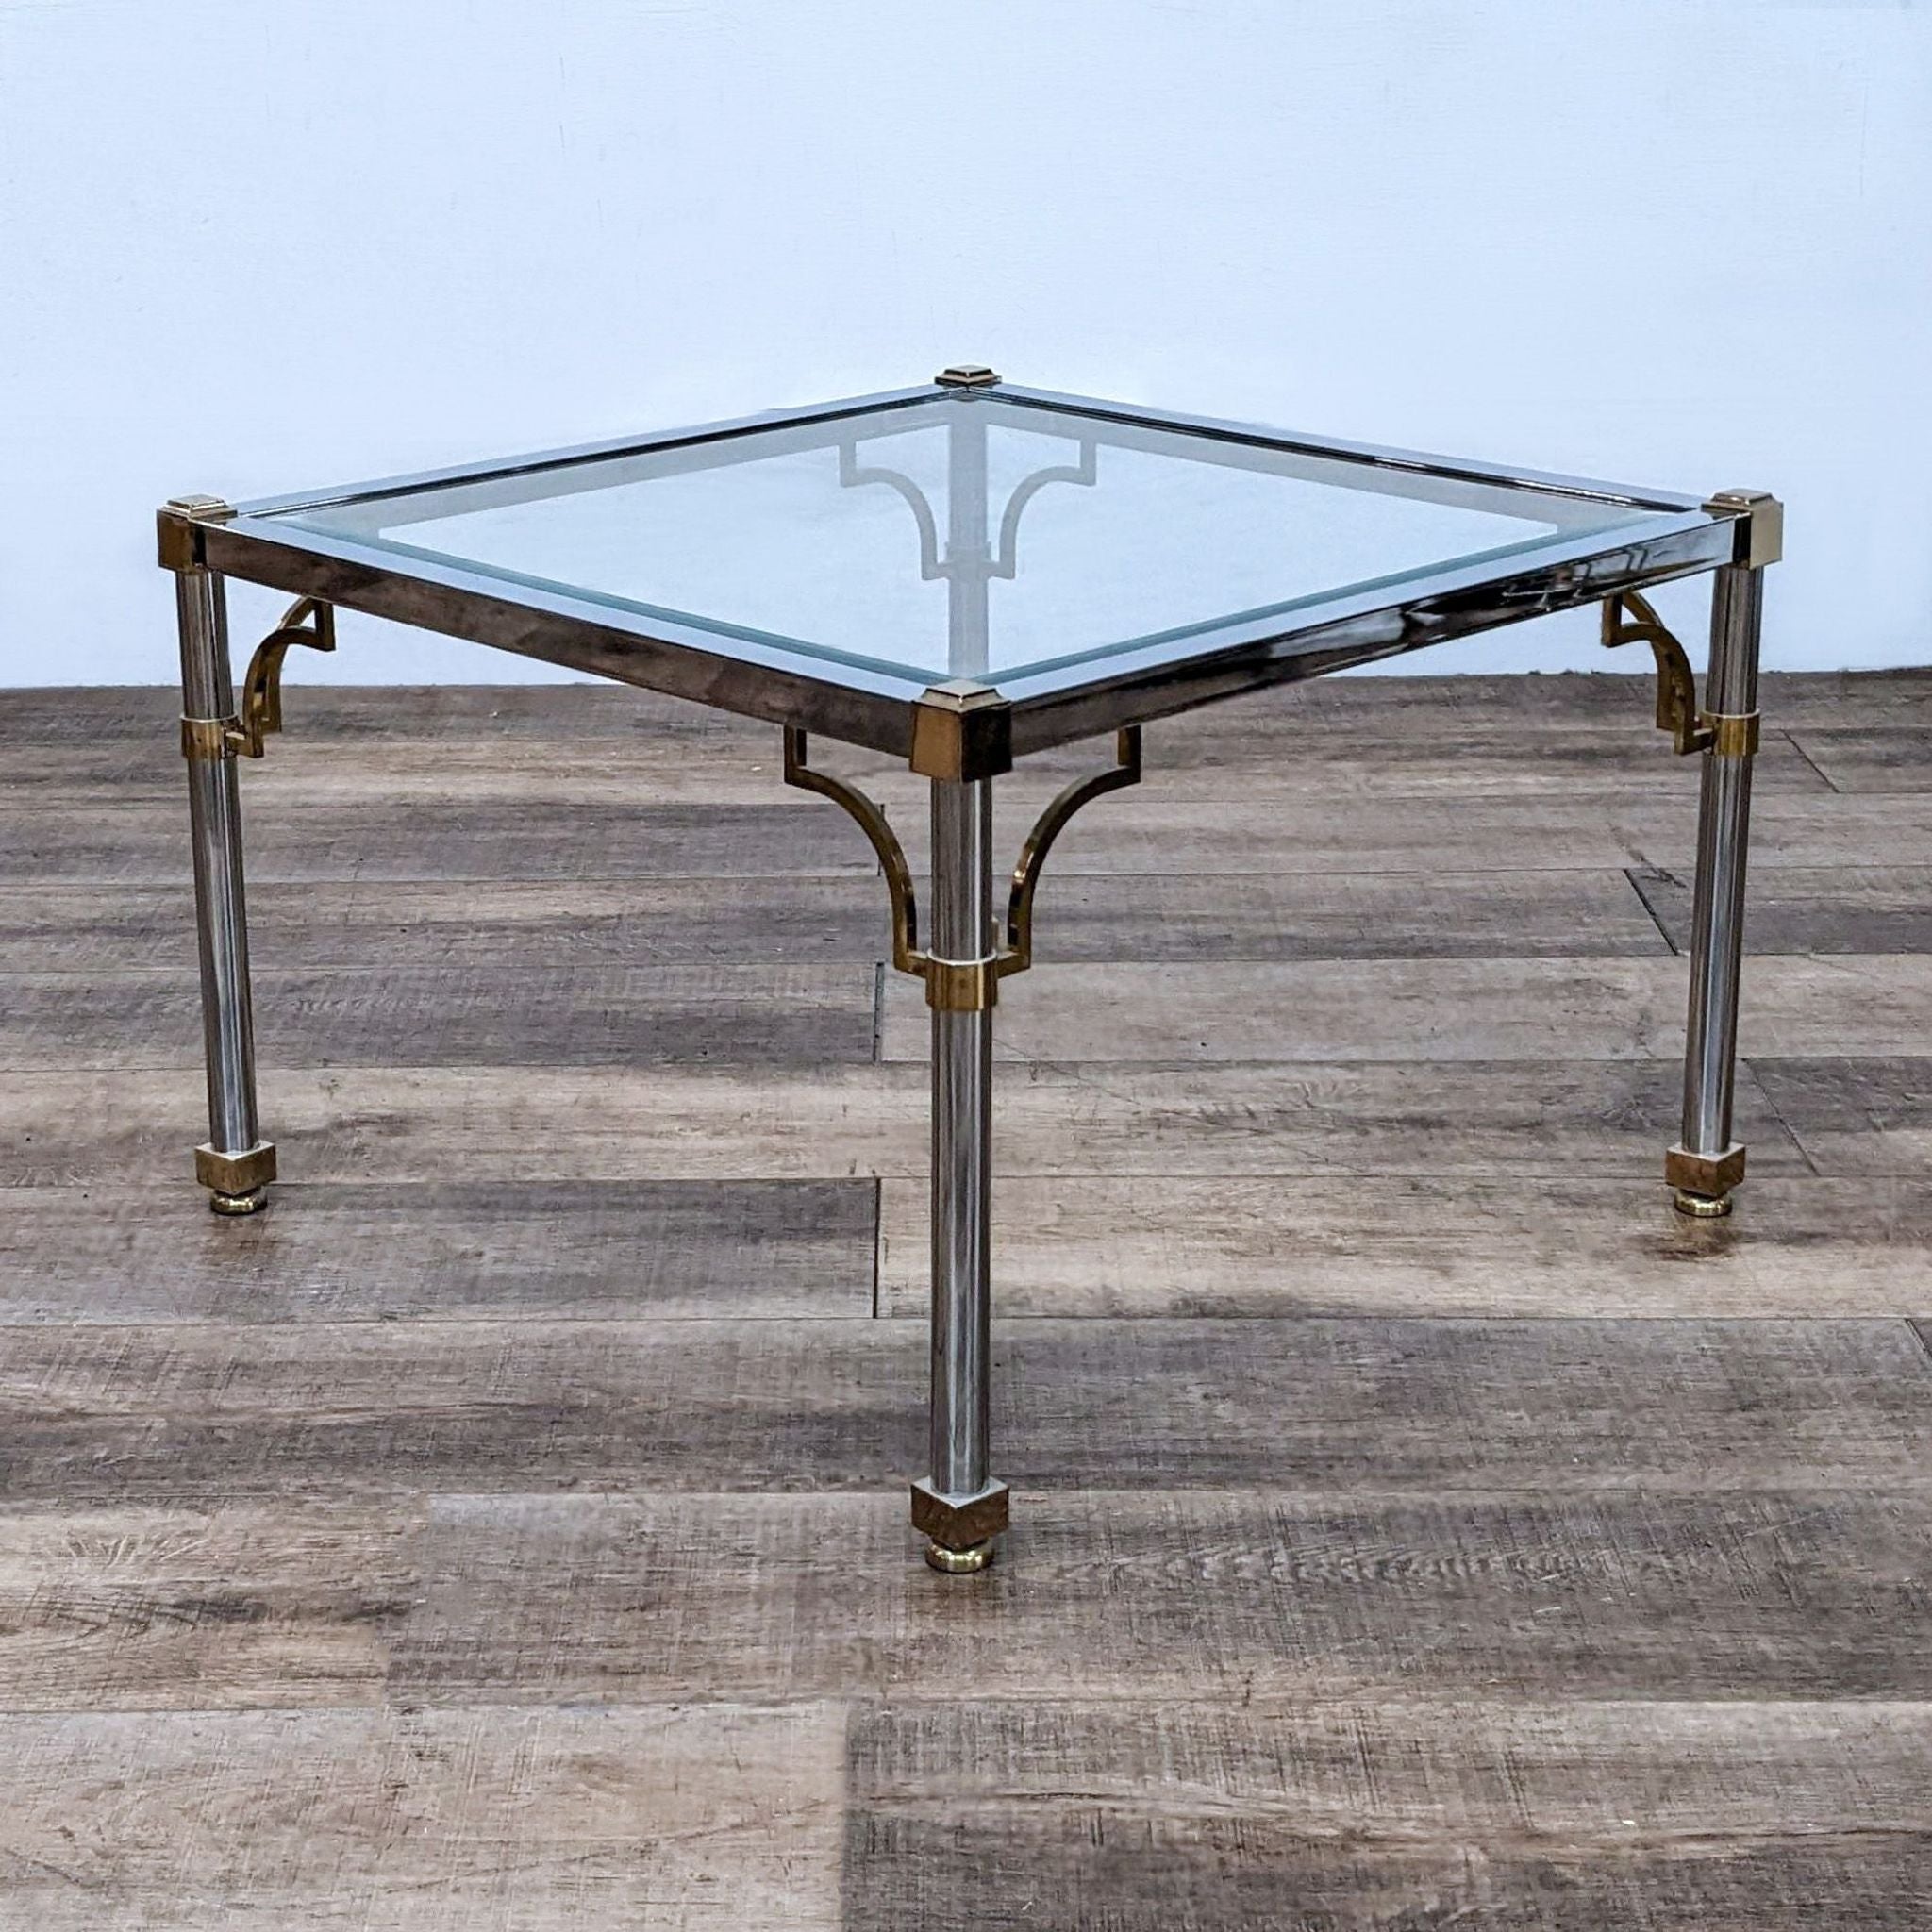 Modern glass Reperch end table with sleek silver frame and elegant golden details, set against a wooden background.